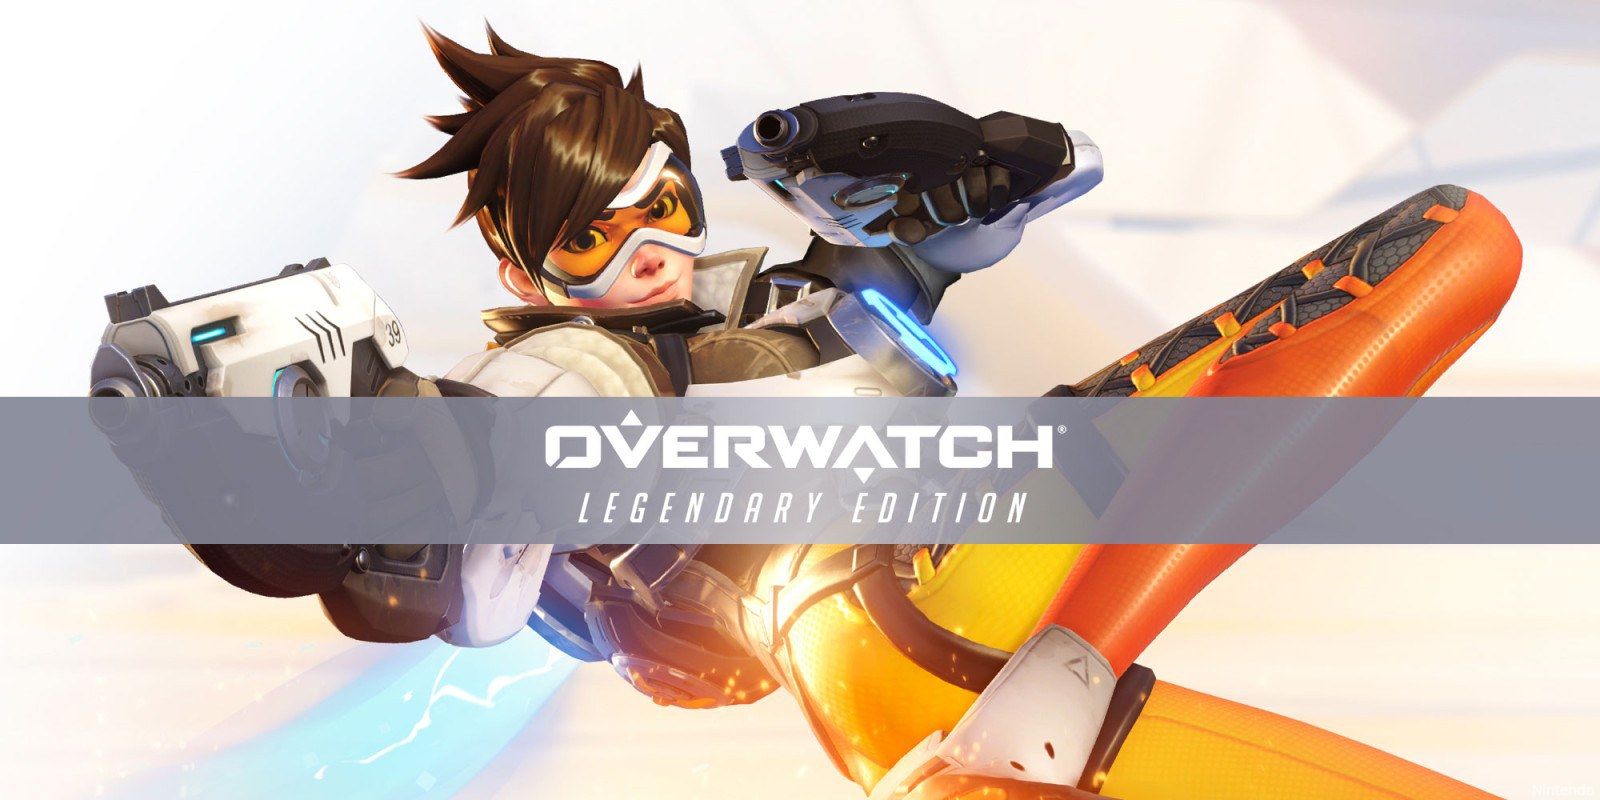 h2x1 nswitchds overwatchlegendaryedition image1600wf1577301018